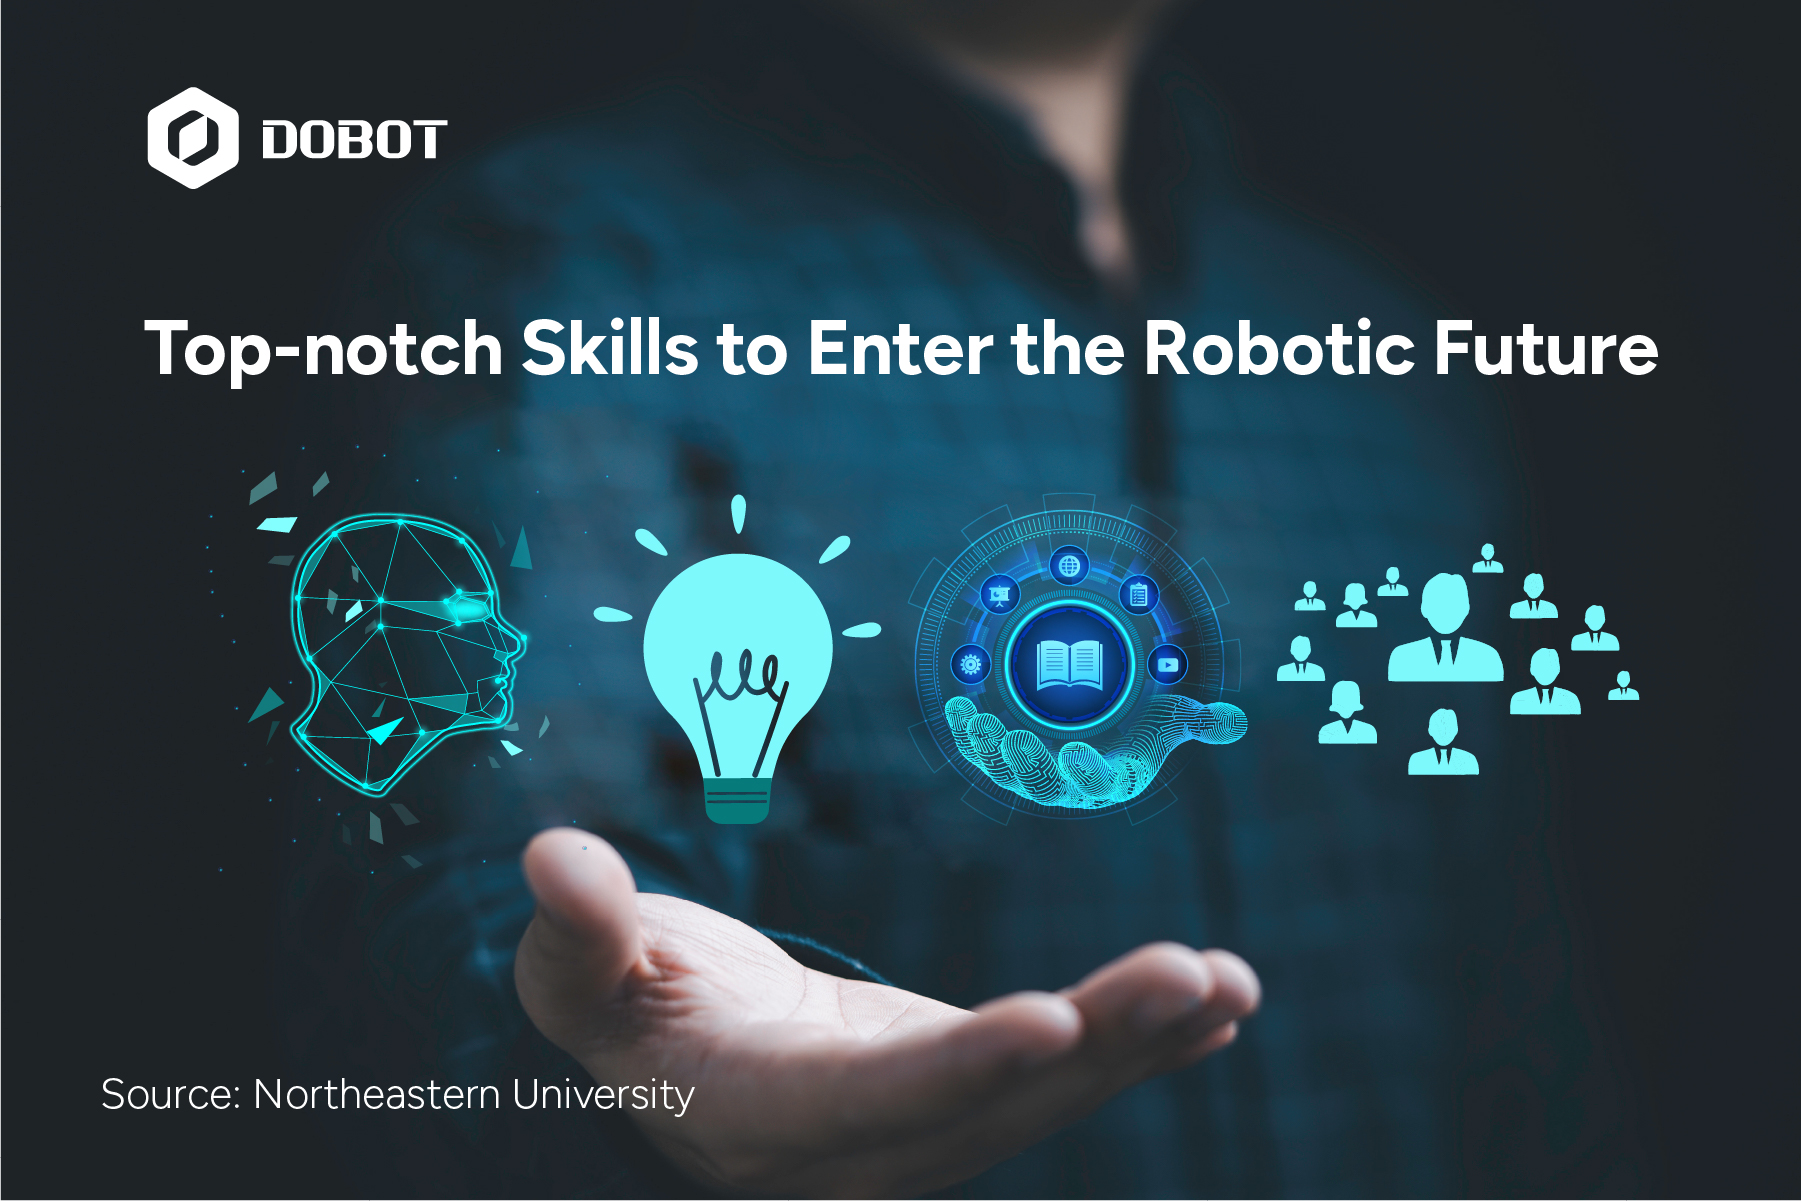 Top-notch Skills to Enter the Robotic Future